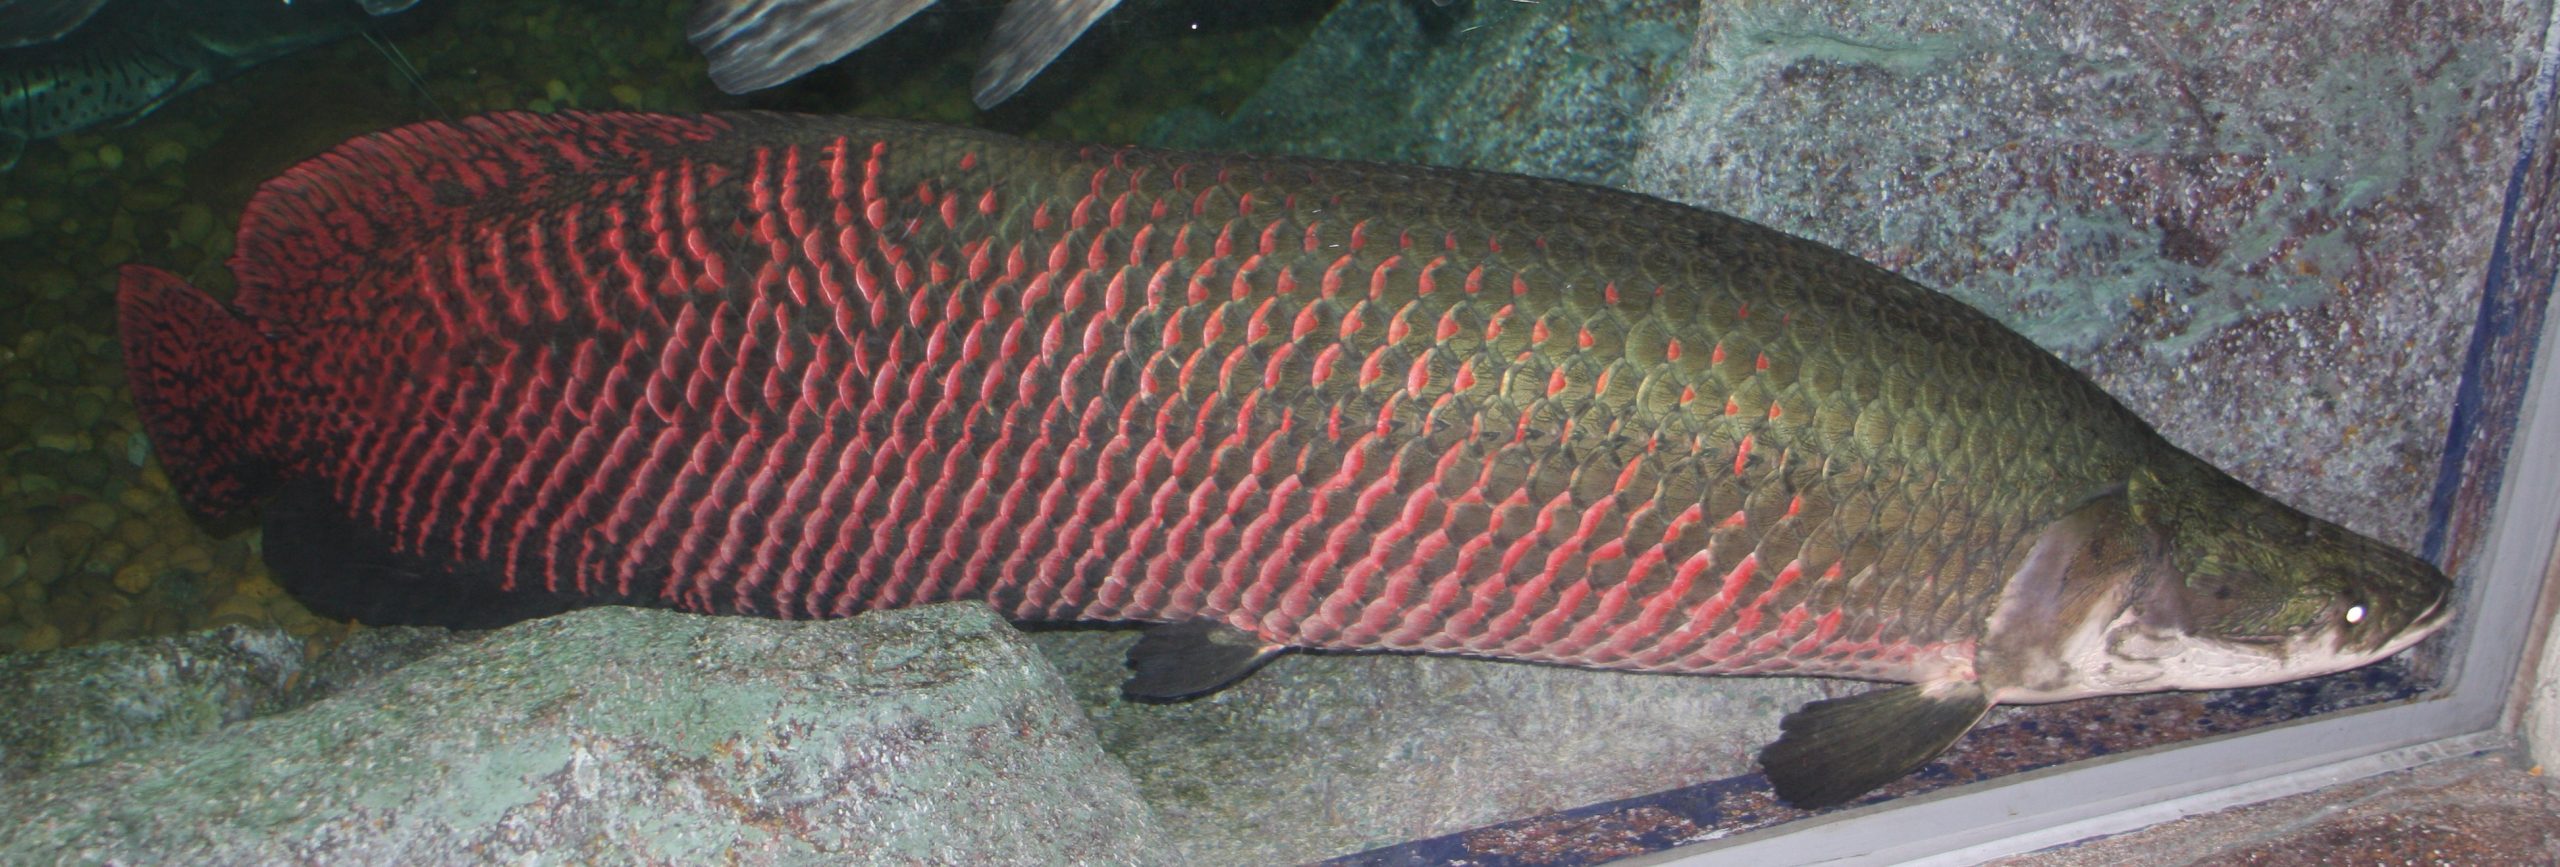 Arapaima with pink and green scales in aquarium